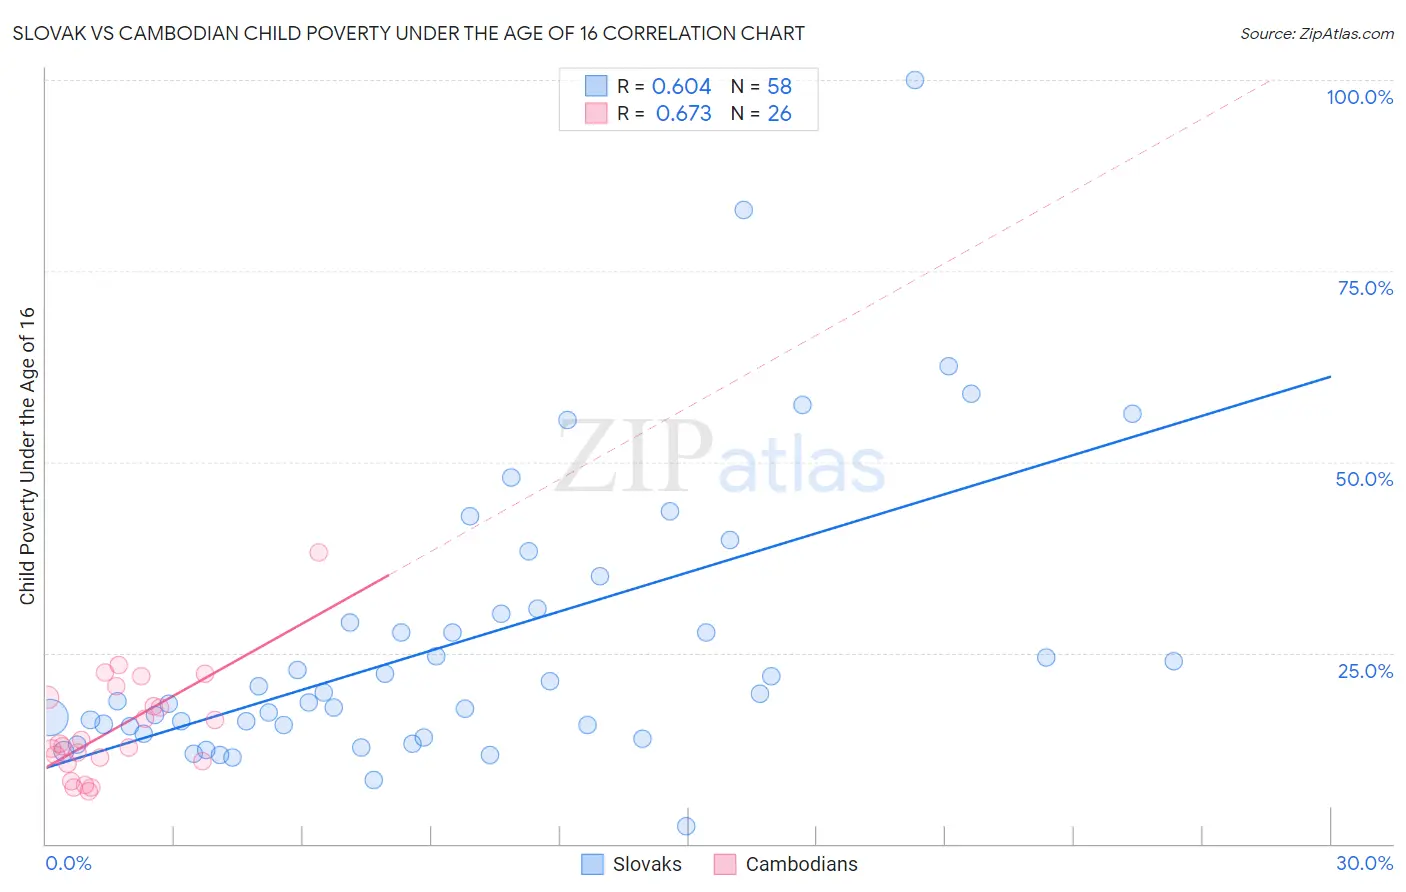 Slovak vs Cambodian Child Poverty Under the Age of 16